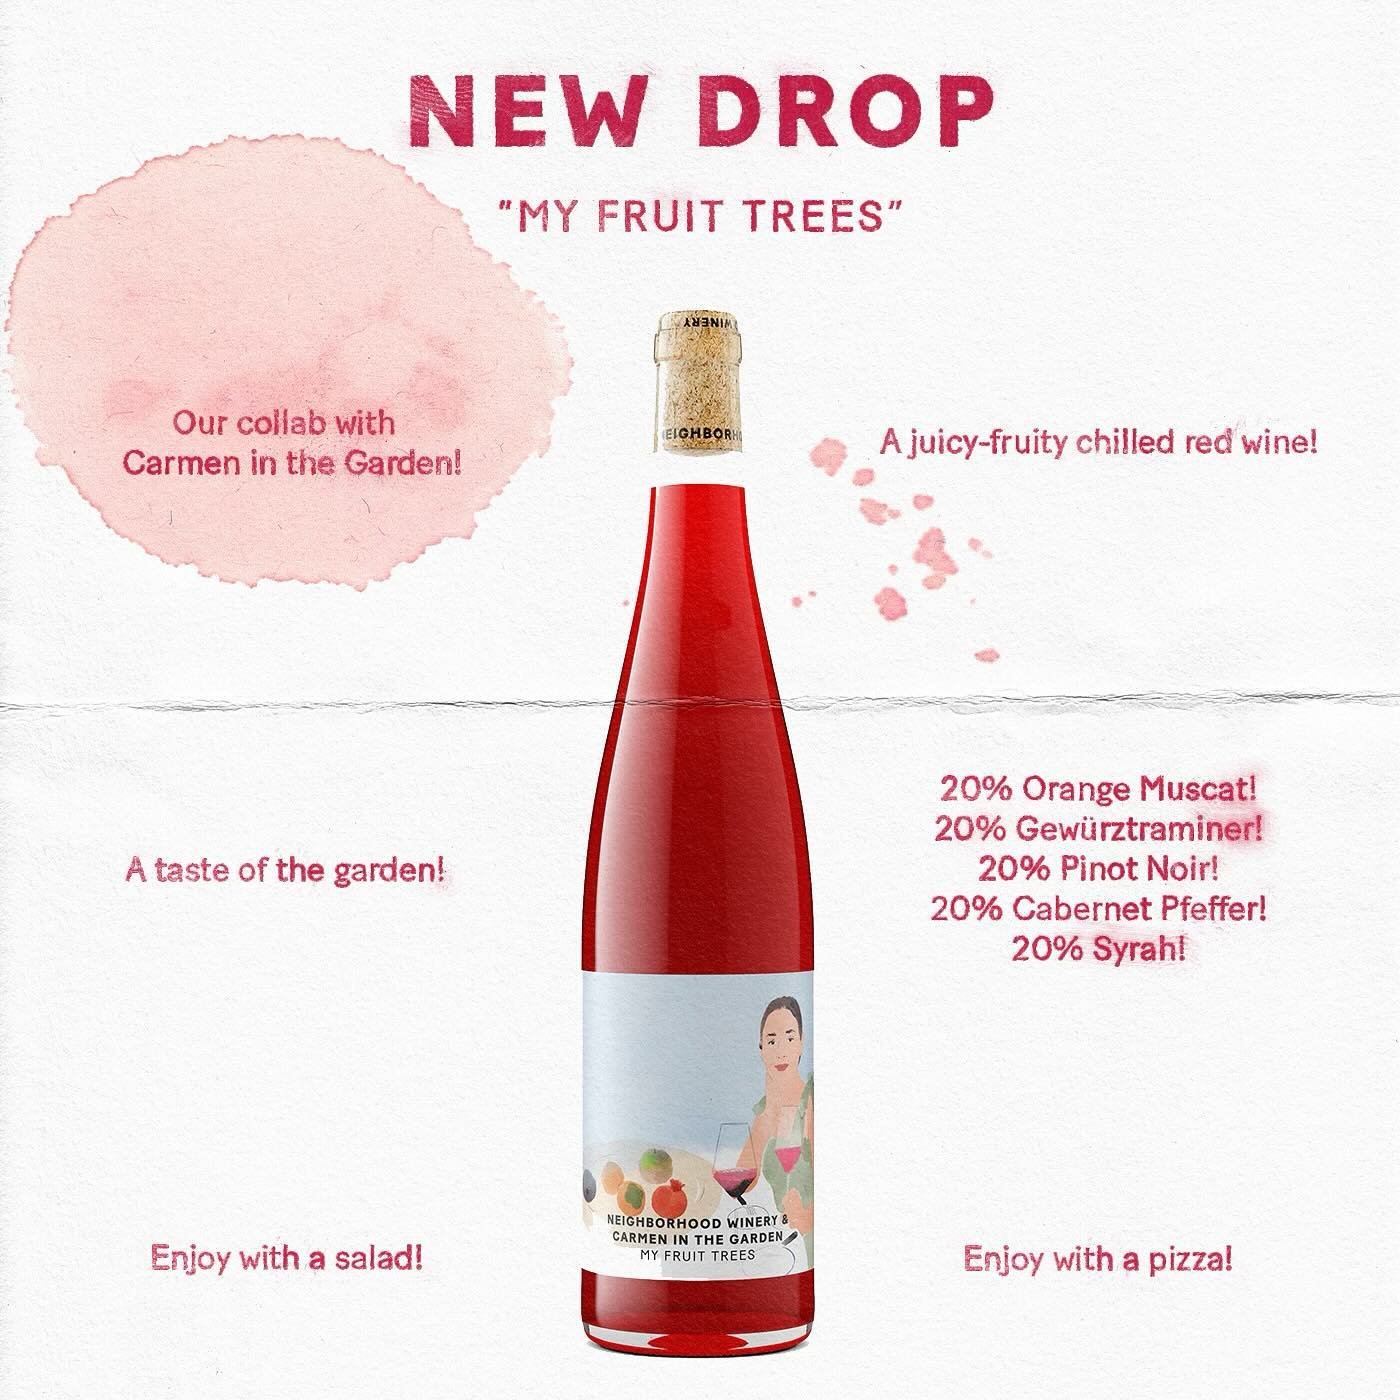 &lsquo;My Fruit Trees&rsquo; Our @carmeninthegarden collab is out now! 

My Fruit Trees is an annual tradition where Carmen makes a wine with us to taste just like her garden. A bit tricky, takes us a lot of time to perfect the blend, but at the end 